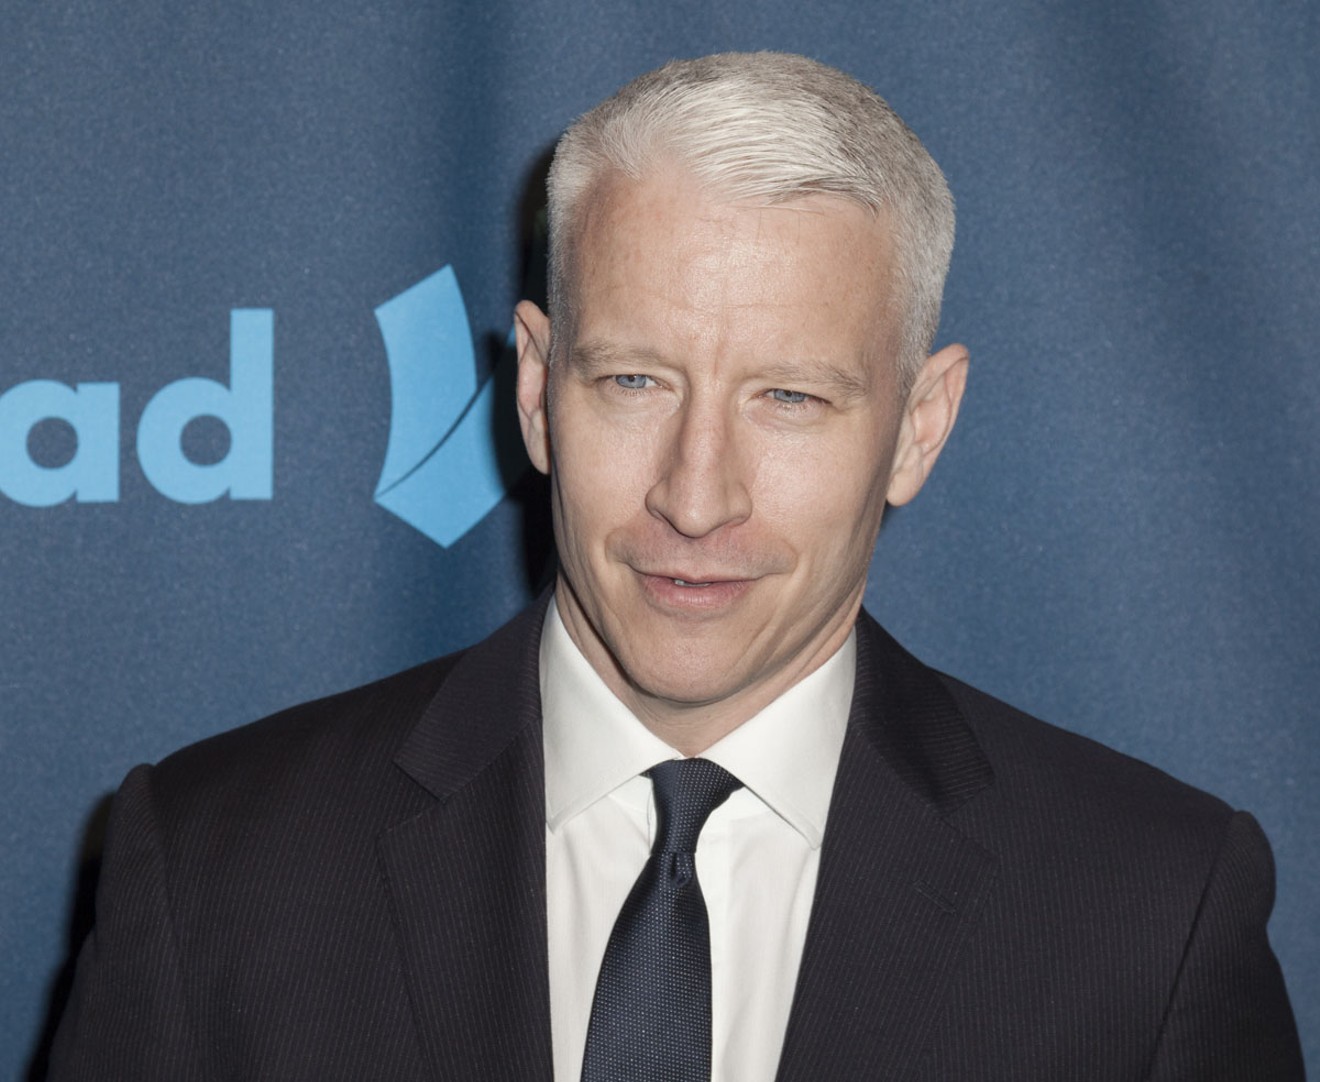 Anderson Cooper and longtime pal Andy Cohen are coming to Phoenix for a chat.